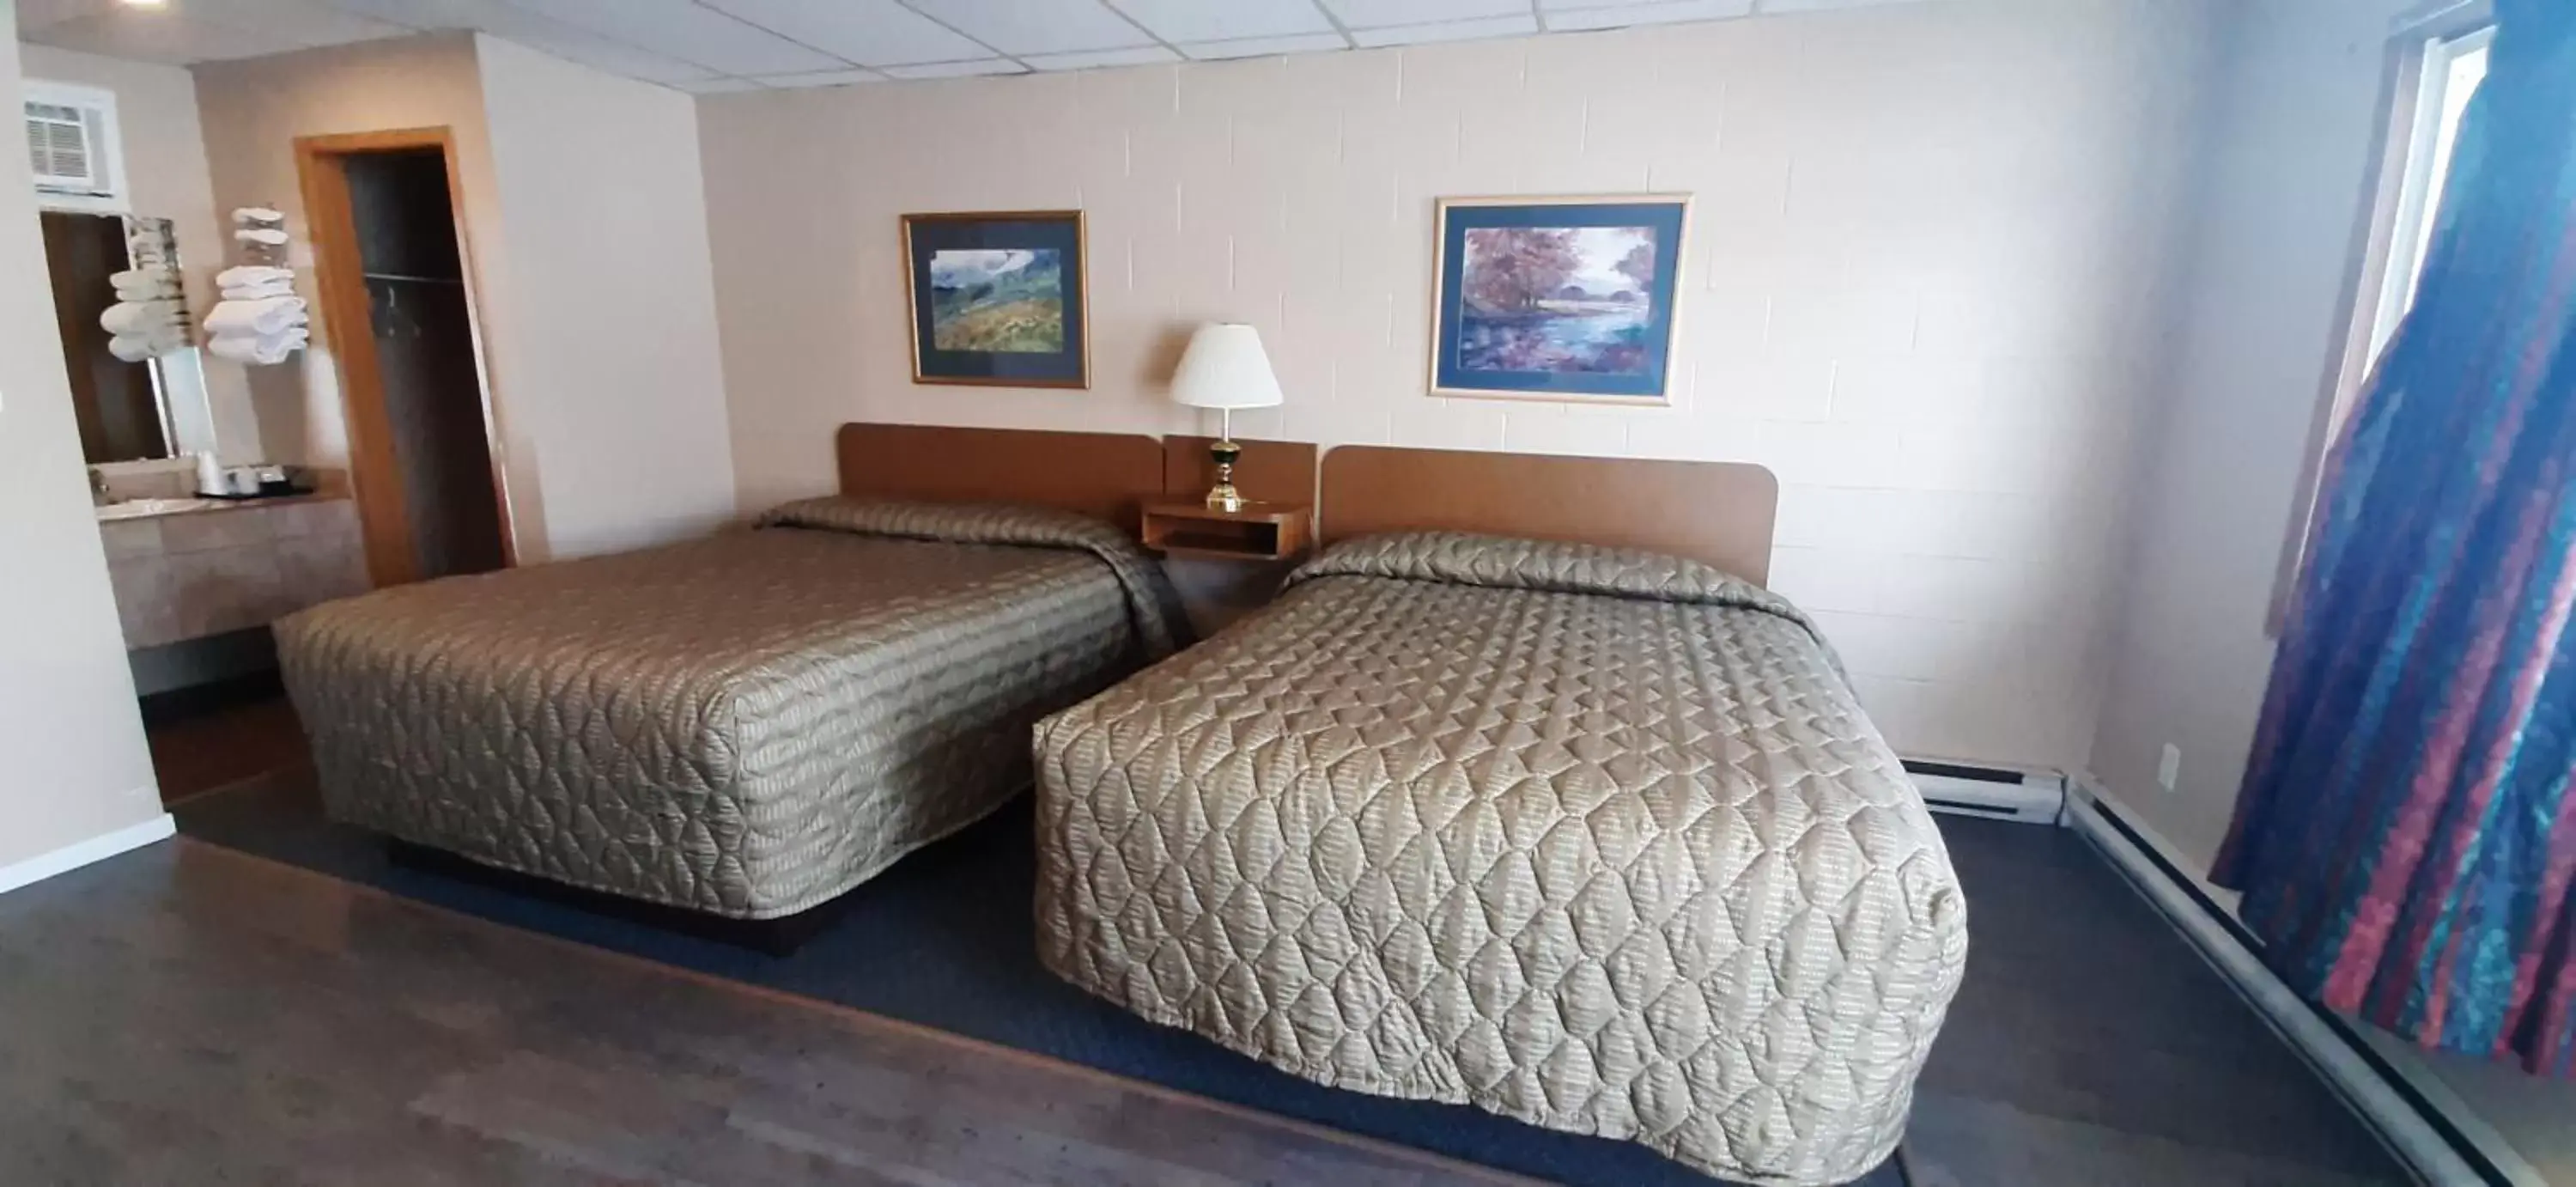 Bed in Mary's Motel